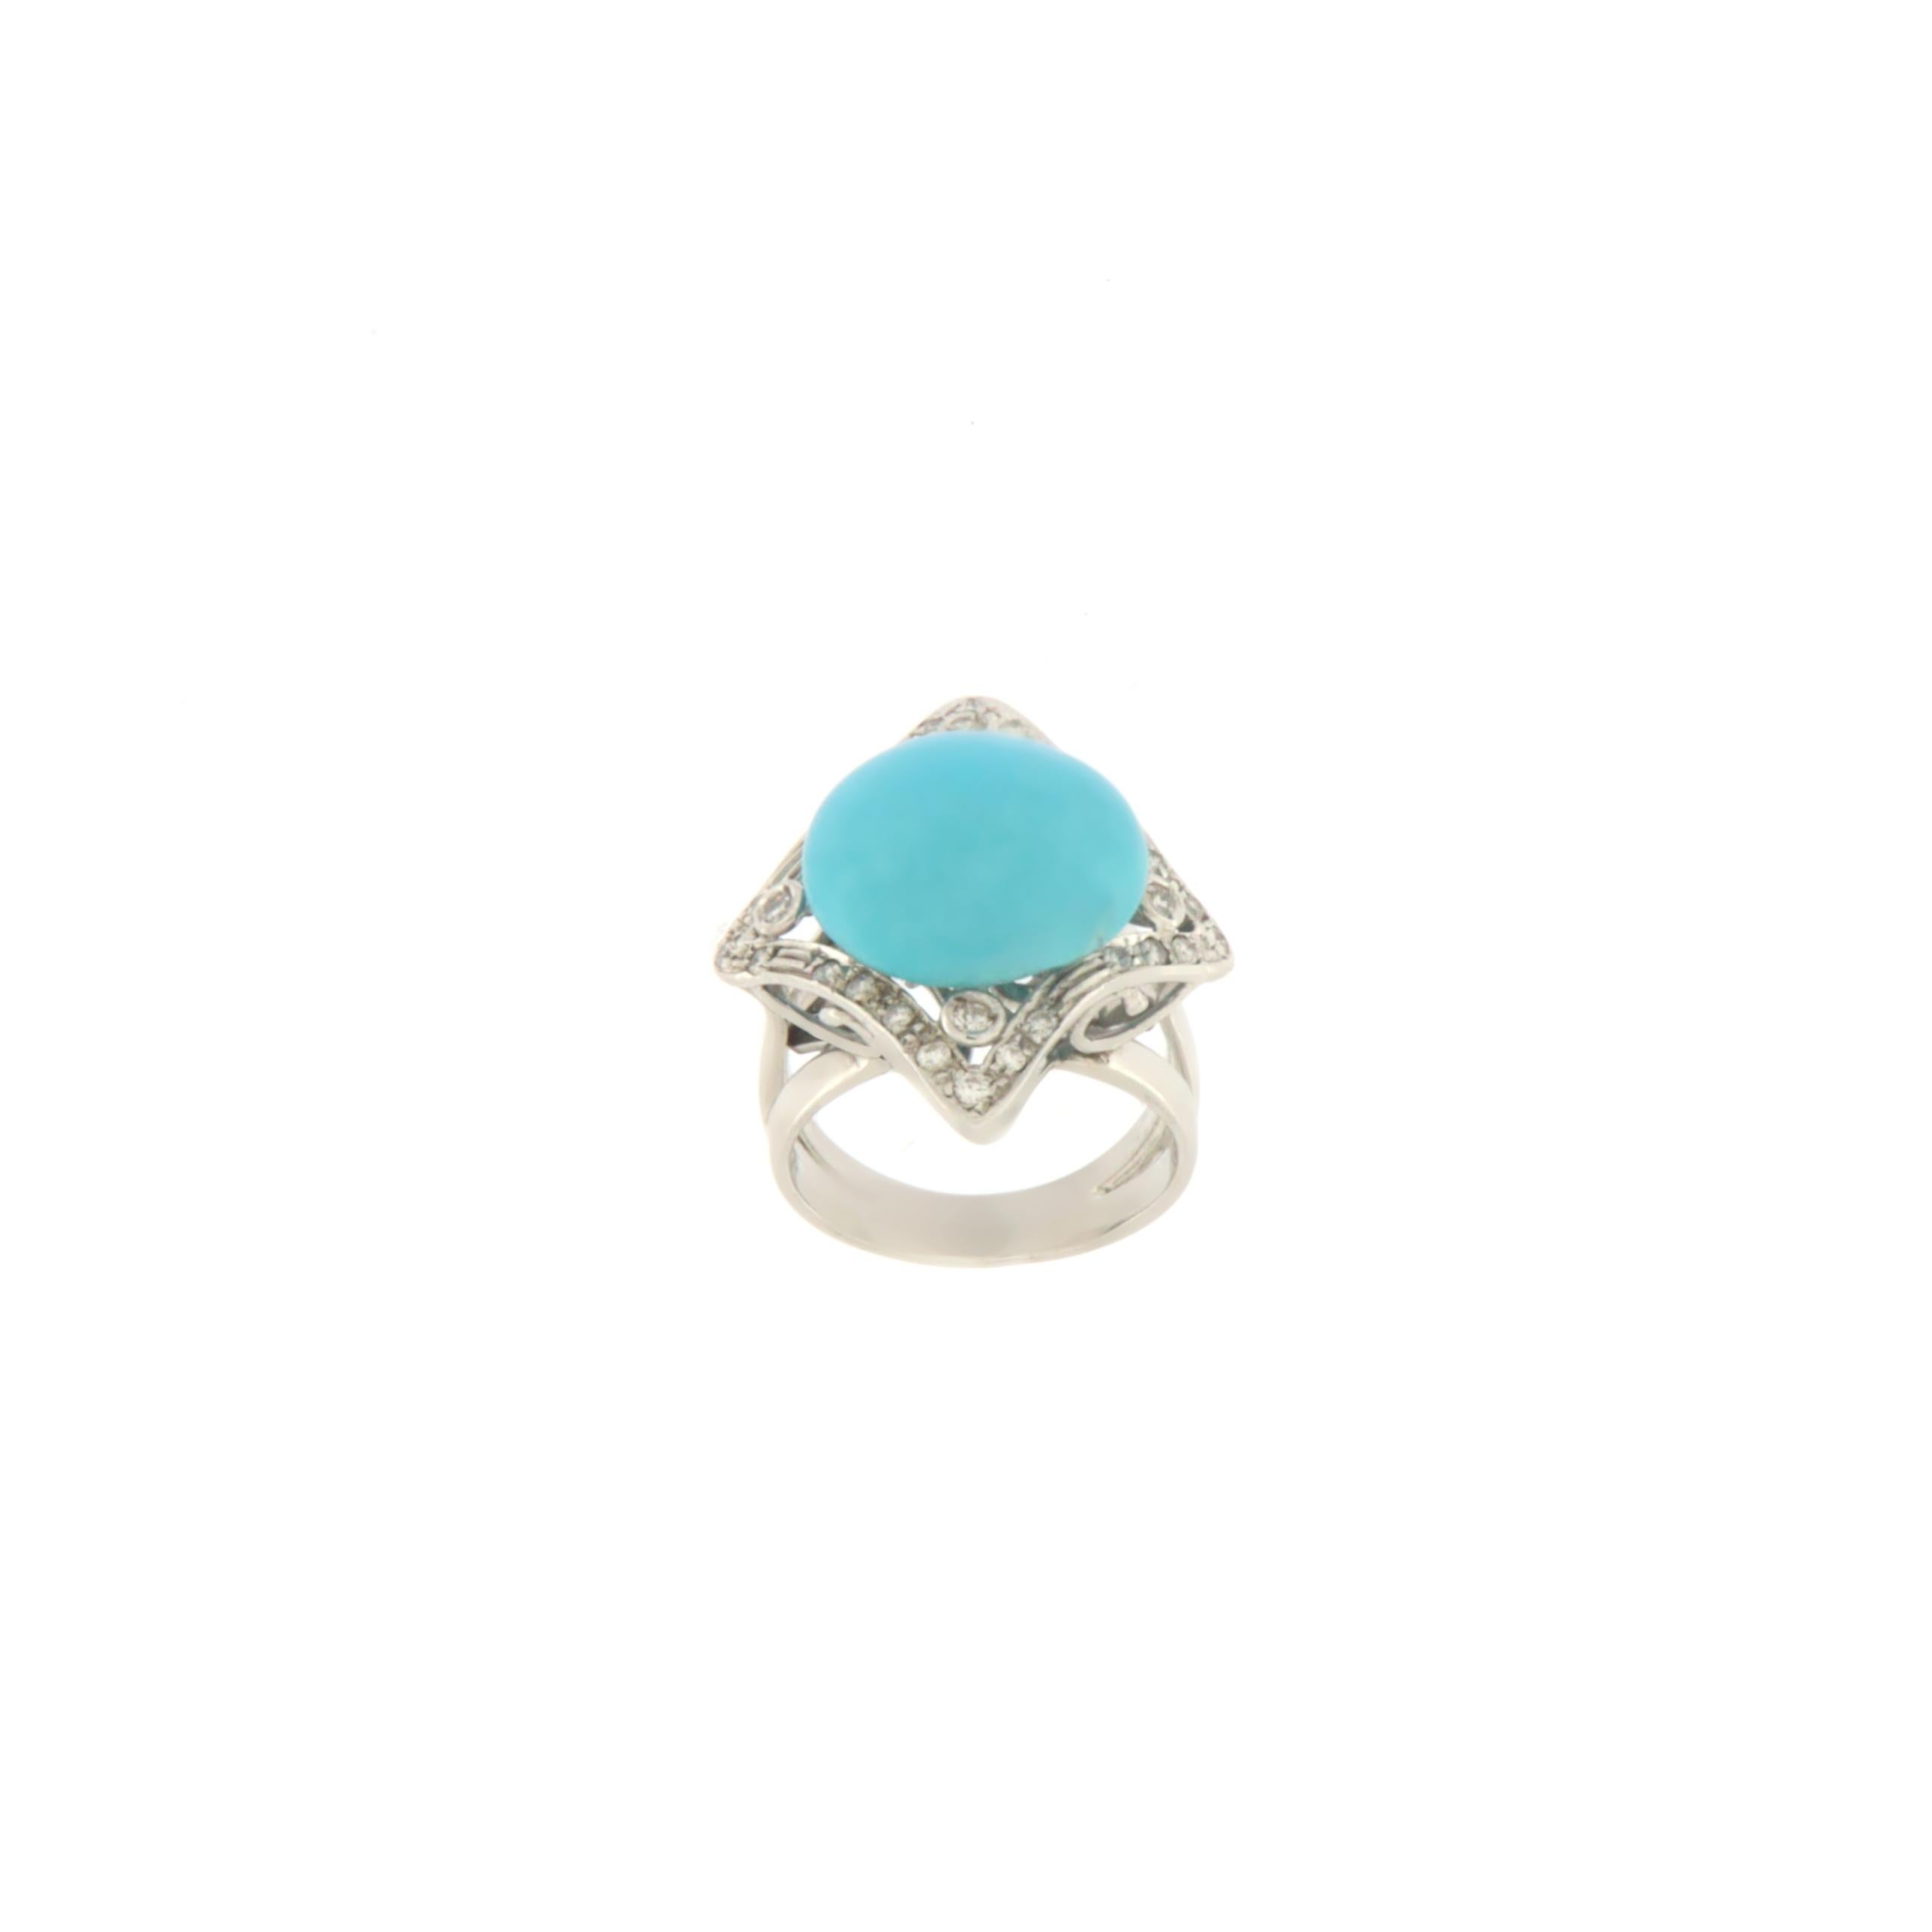 Fascinating ring made entirely by hand in 18K white gold surrounded by brilliants and with a natural Origin Arizona turquoise button in the center.

The total weight of the ring is equivalent to 12.10 grams

The total weight of the diamonds is